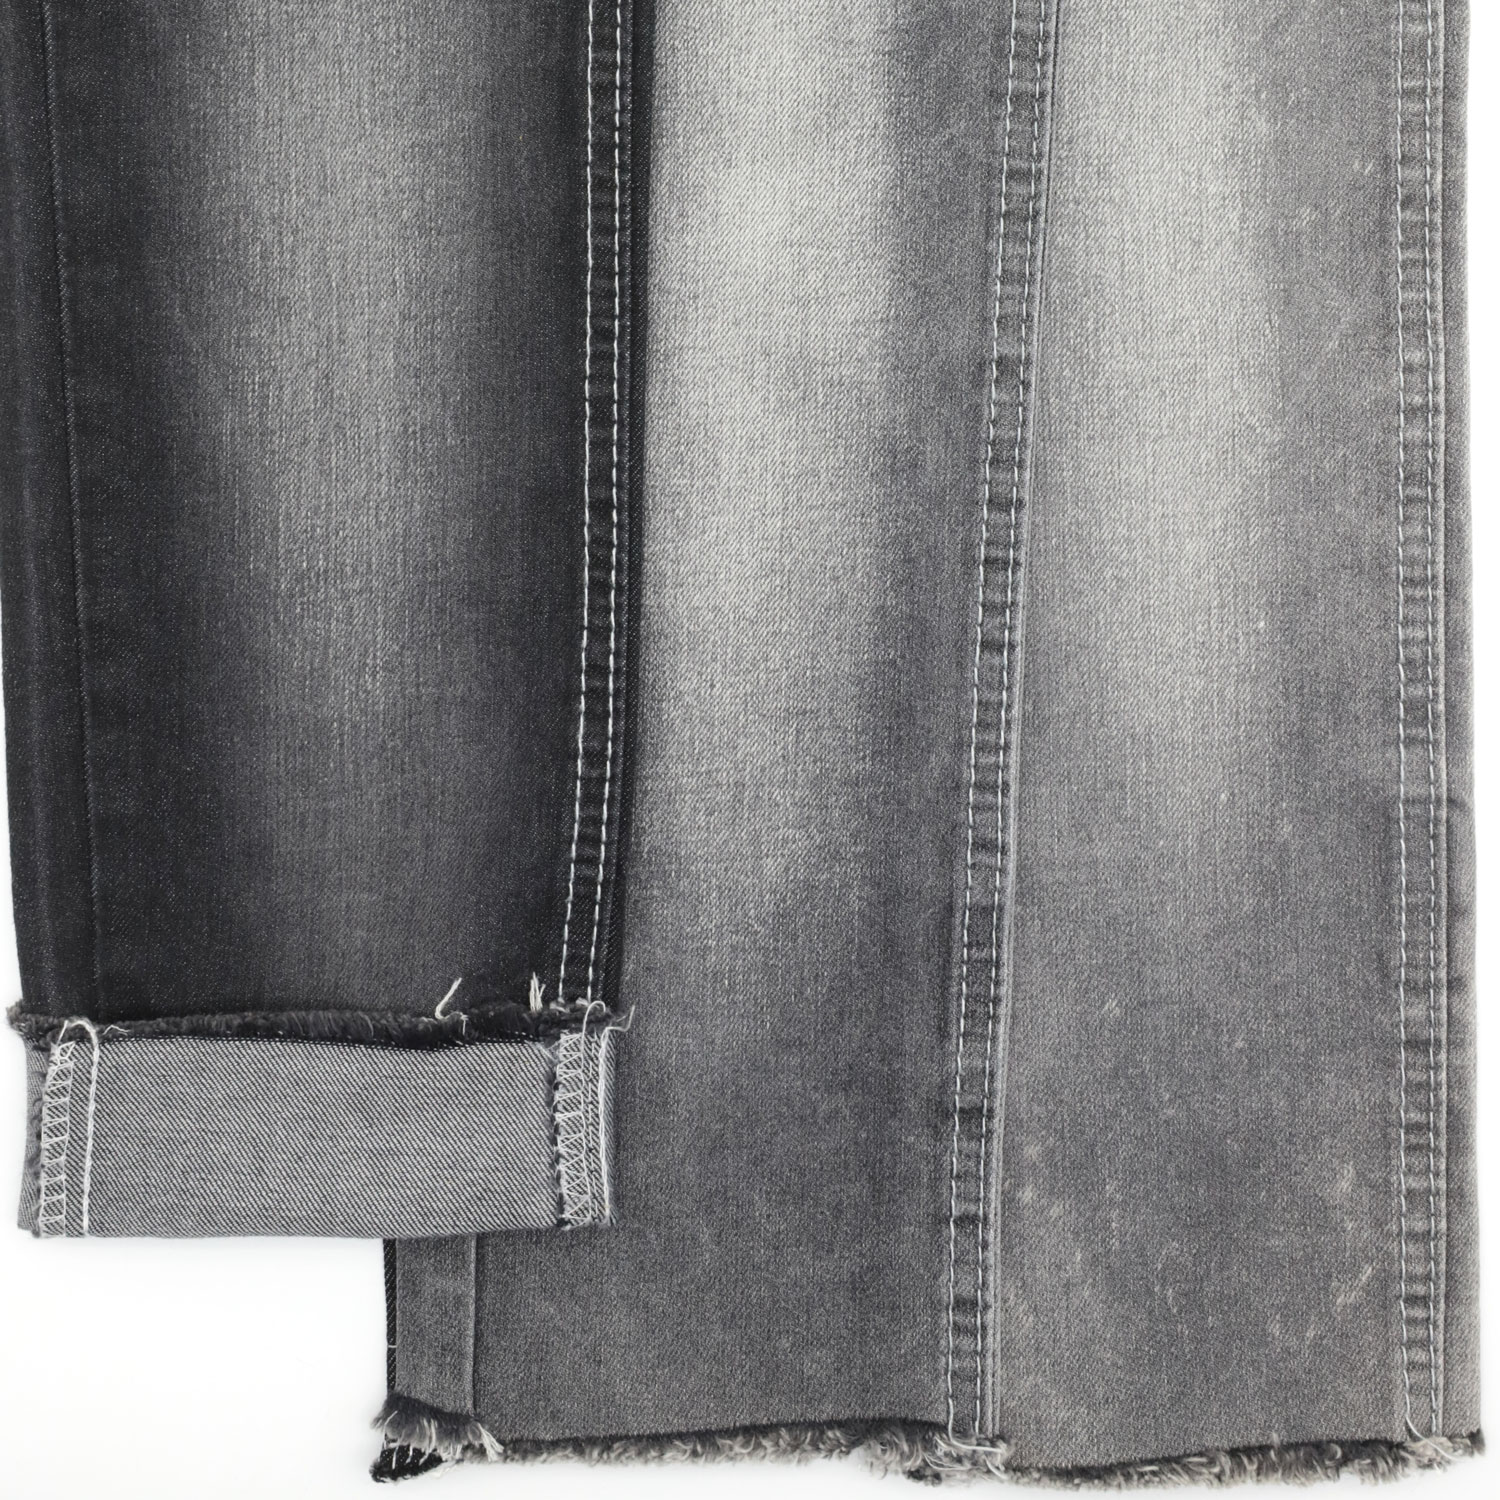 A Complete Guide to the Different Kinds of Stretch Denim Fabric 1